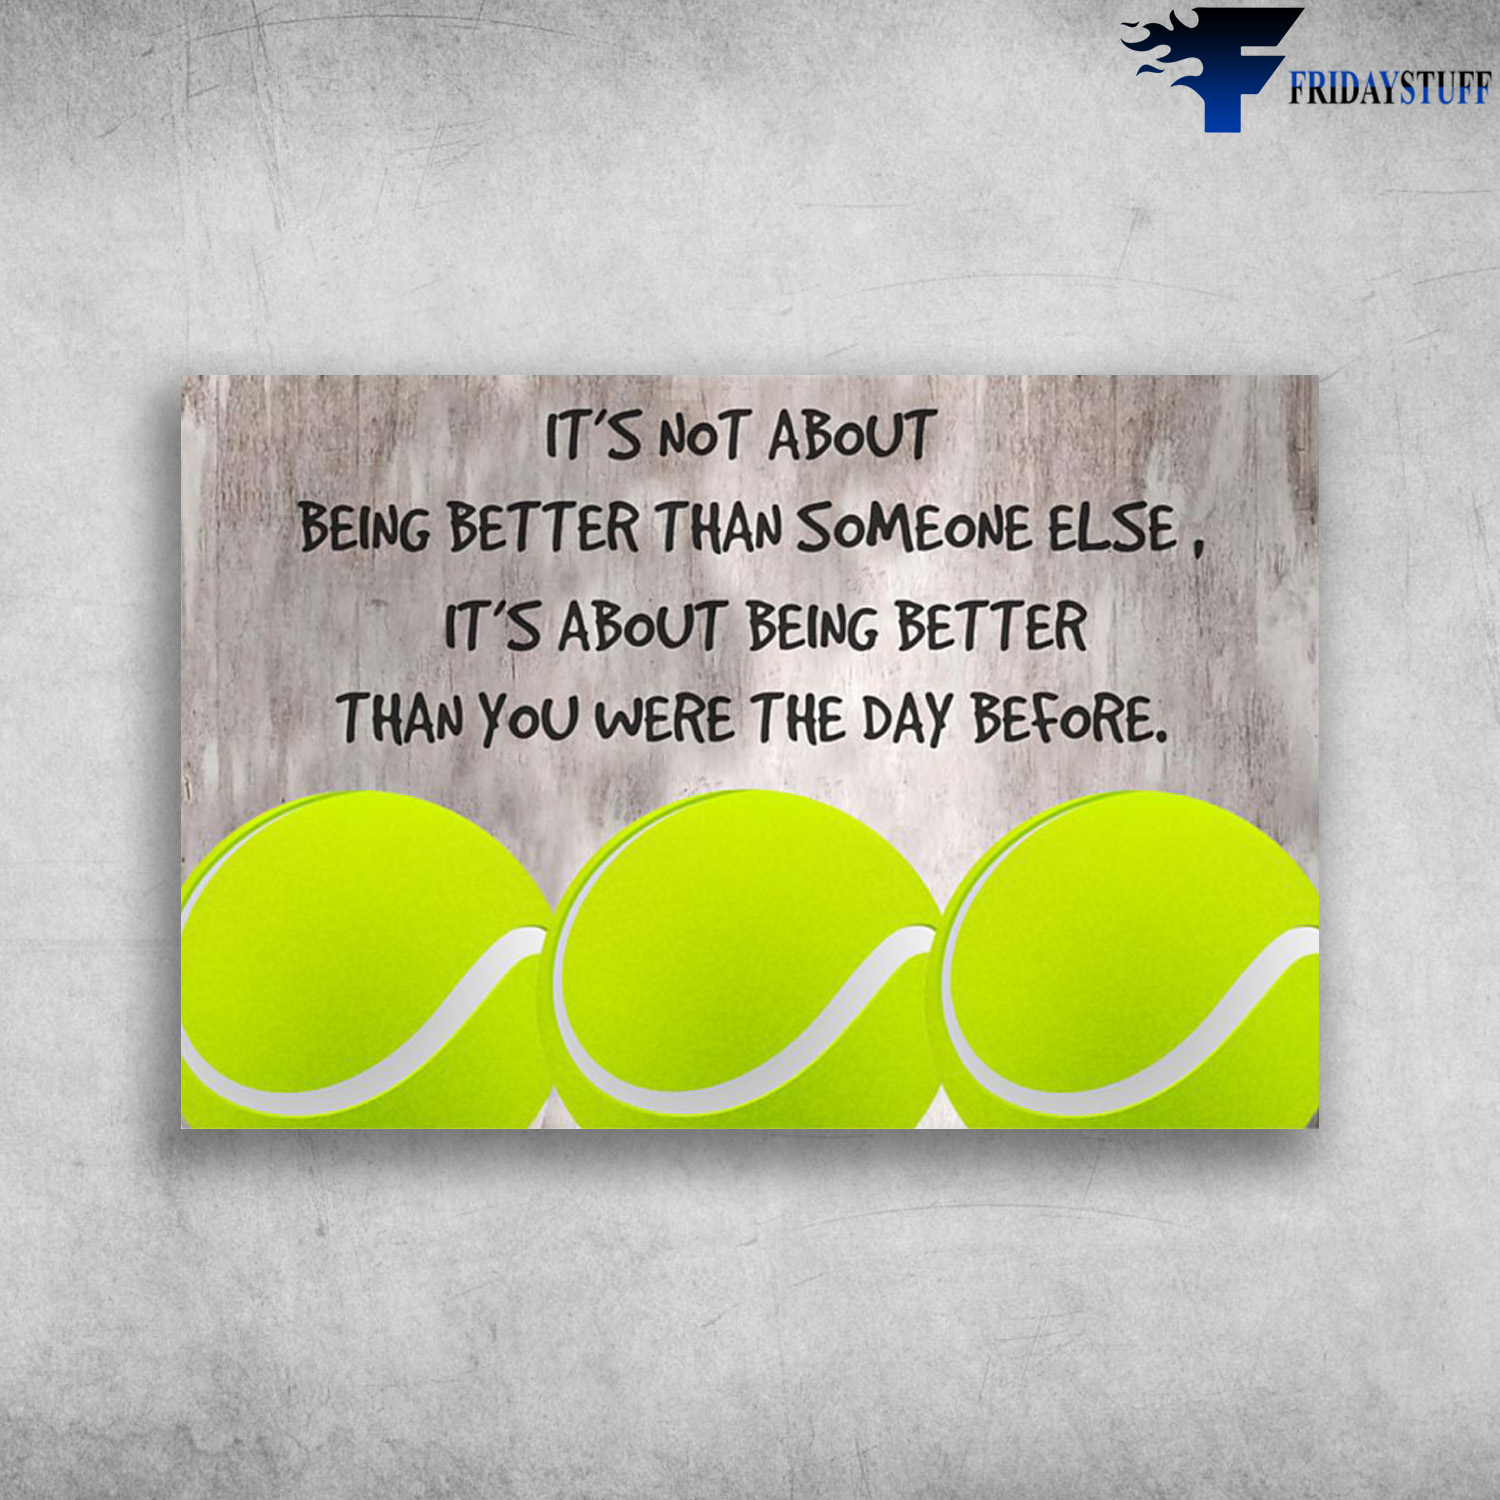 Tennis Ball - It's Not About Being Better Than Someone Else, It's About Being Better Than You Were Yesterday